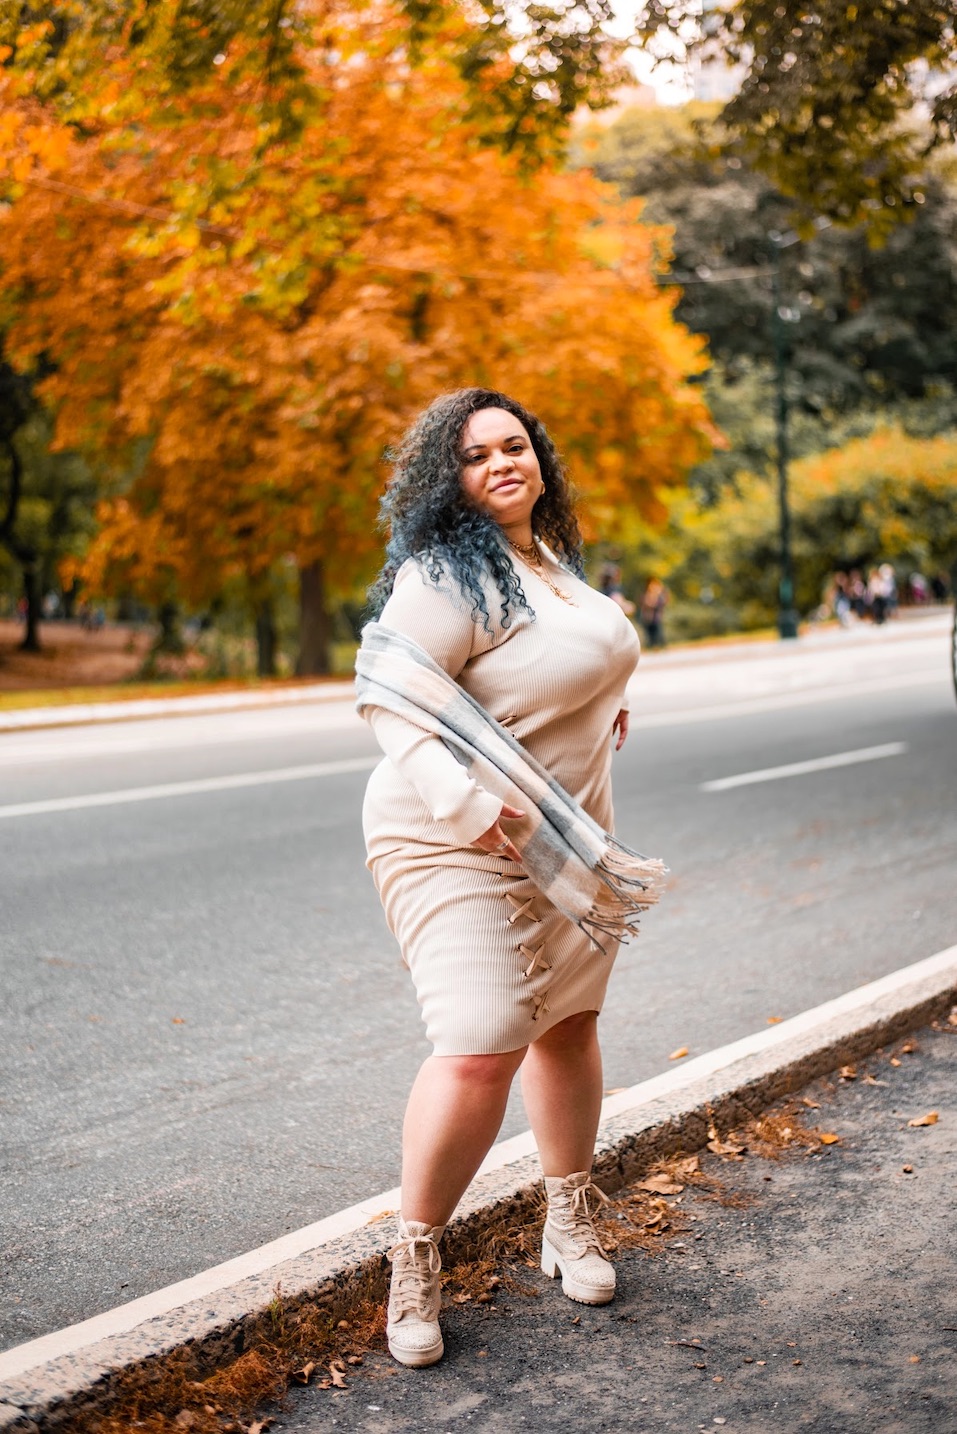 Curvy Girl Outfits.Winter.#outfits #winter #fashion #curvygirl #fyp #f